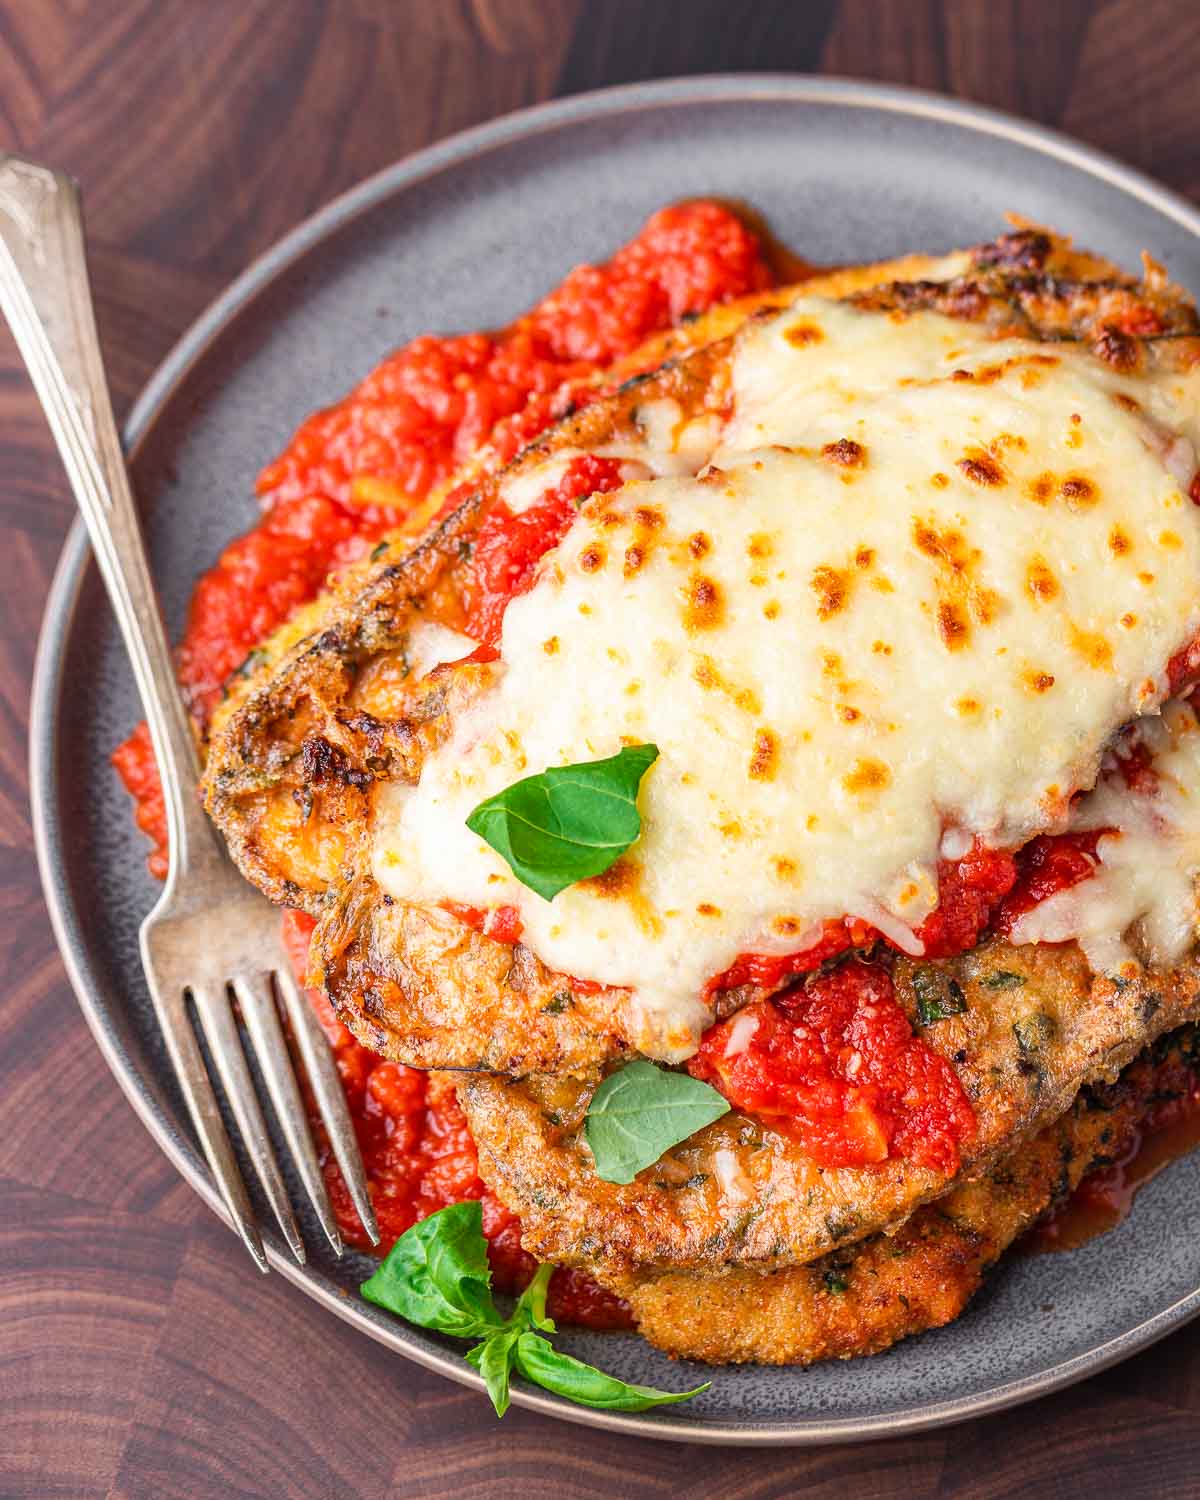 Chicken eggplant parmesan in grey plate on wood cutting board.